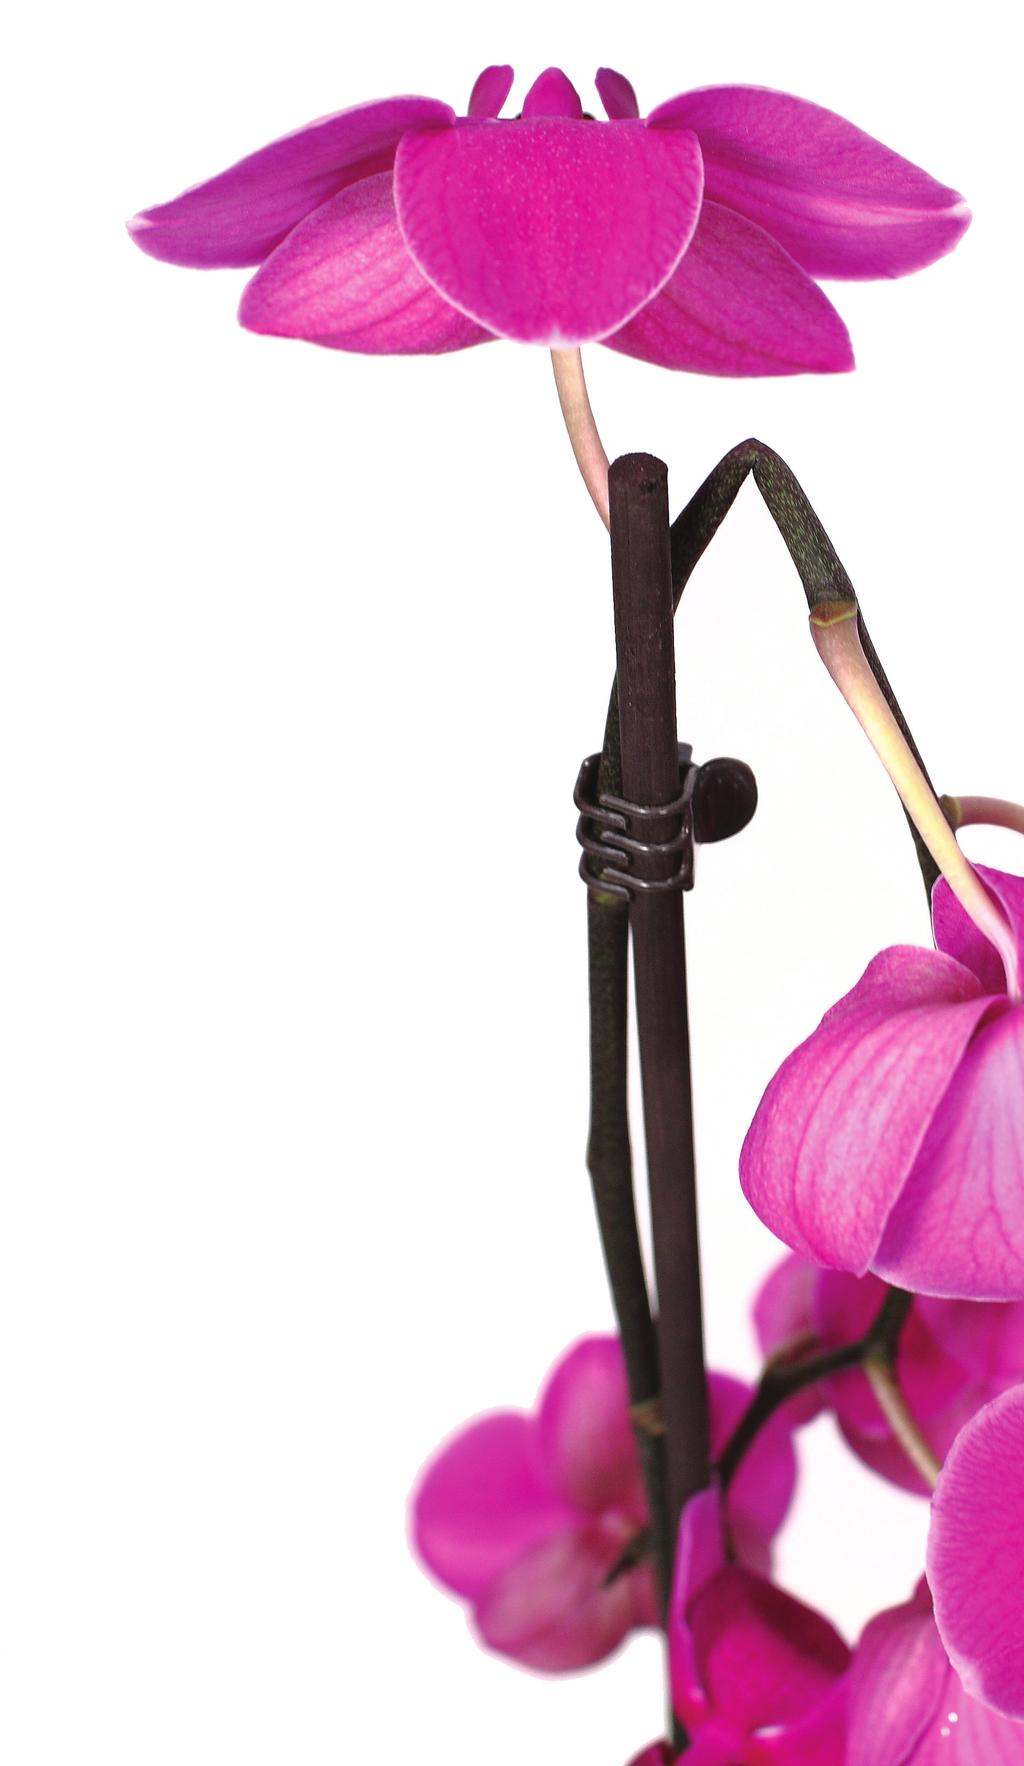 Instead, cut the orchid flower spike above where it has broken, and put it in a vase with water, like you would with any cut flower.